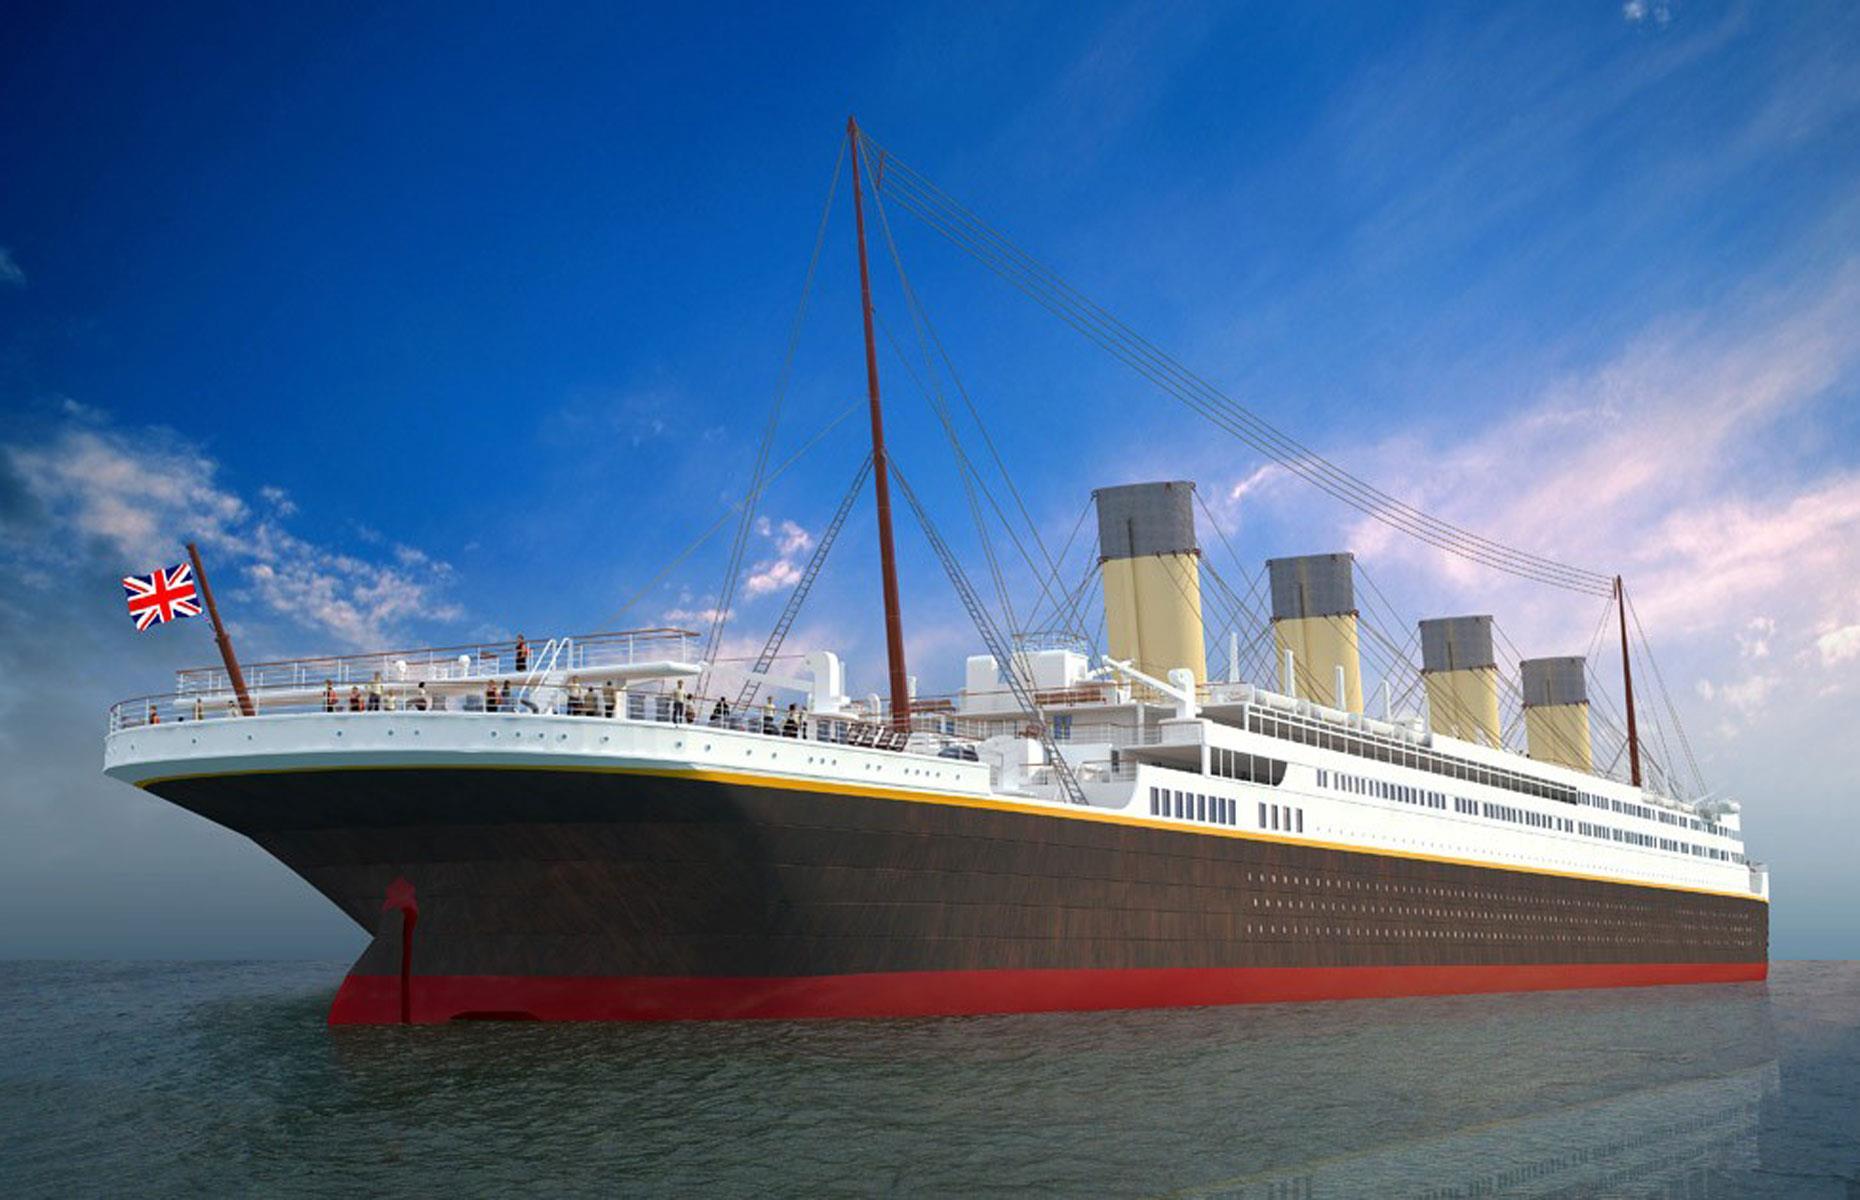 Tour The Titanic The Worlds Most Famous Ship